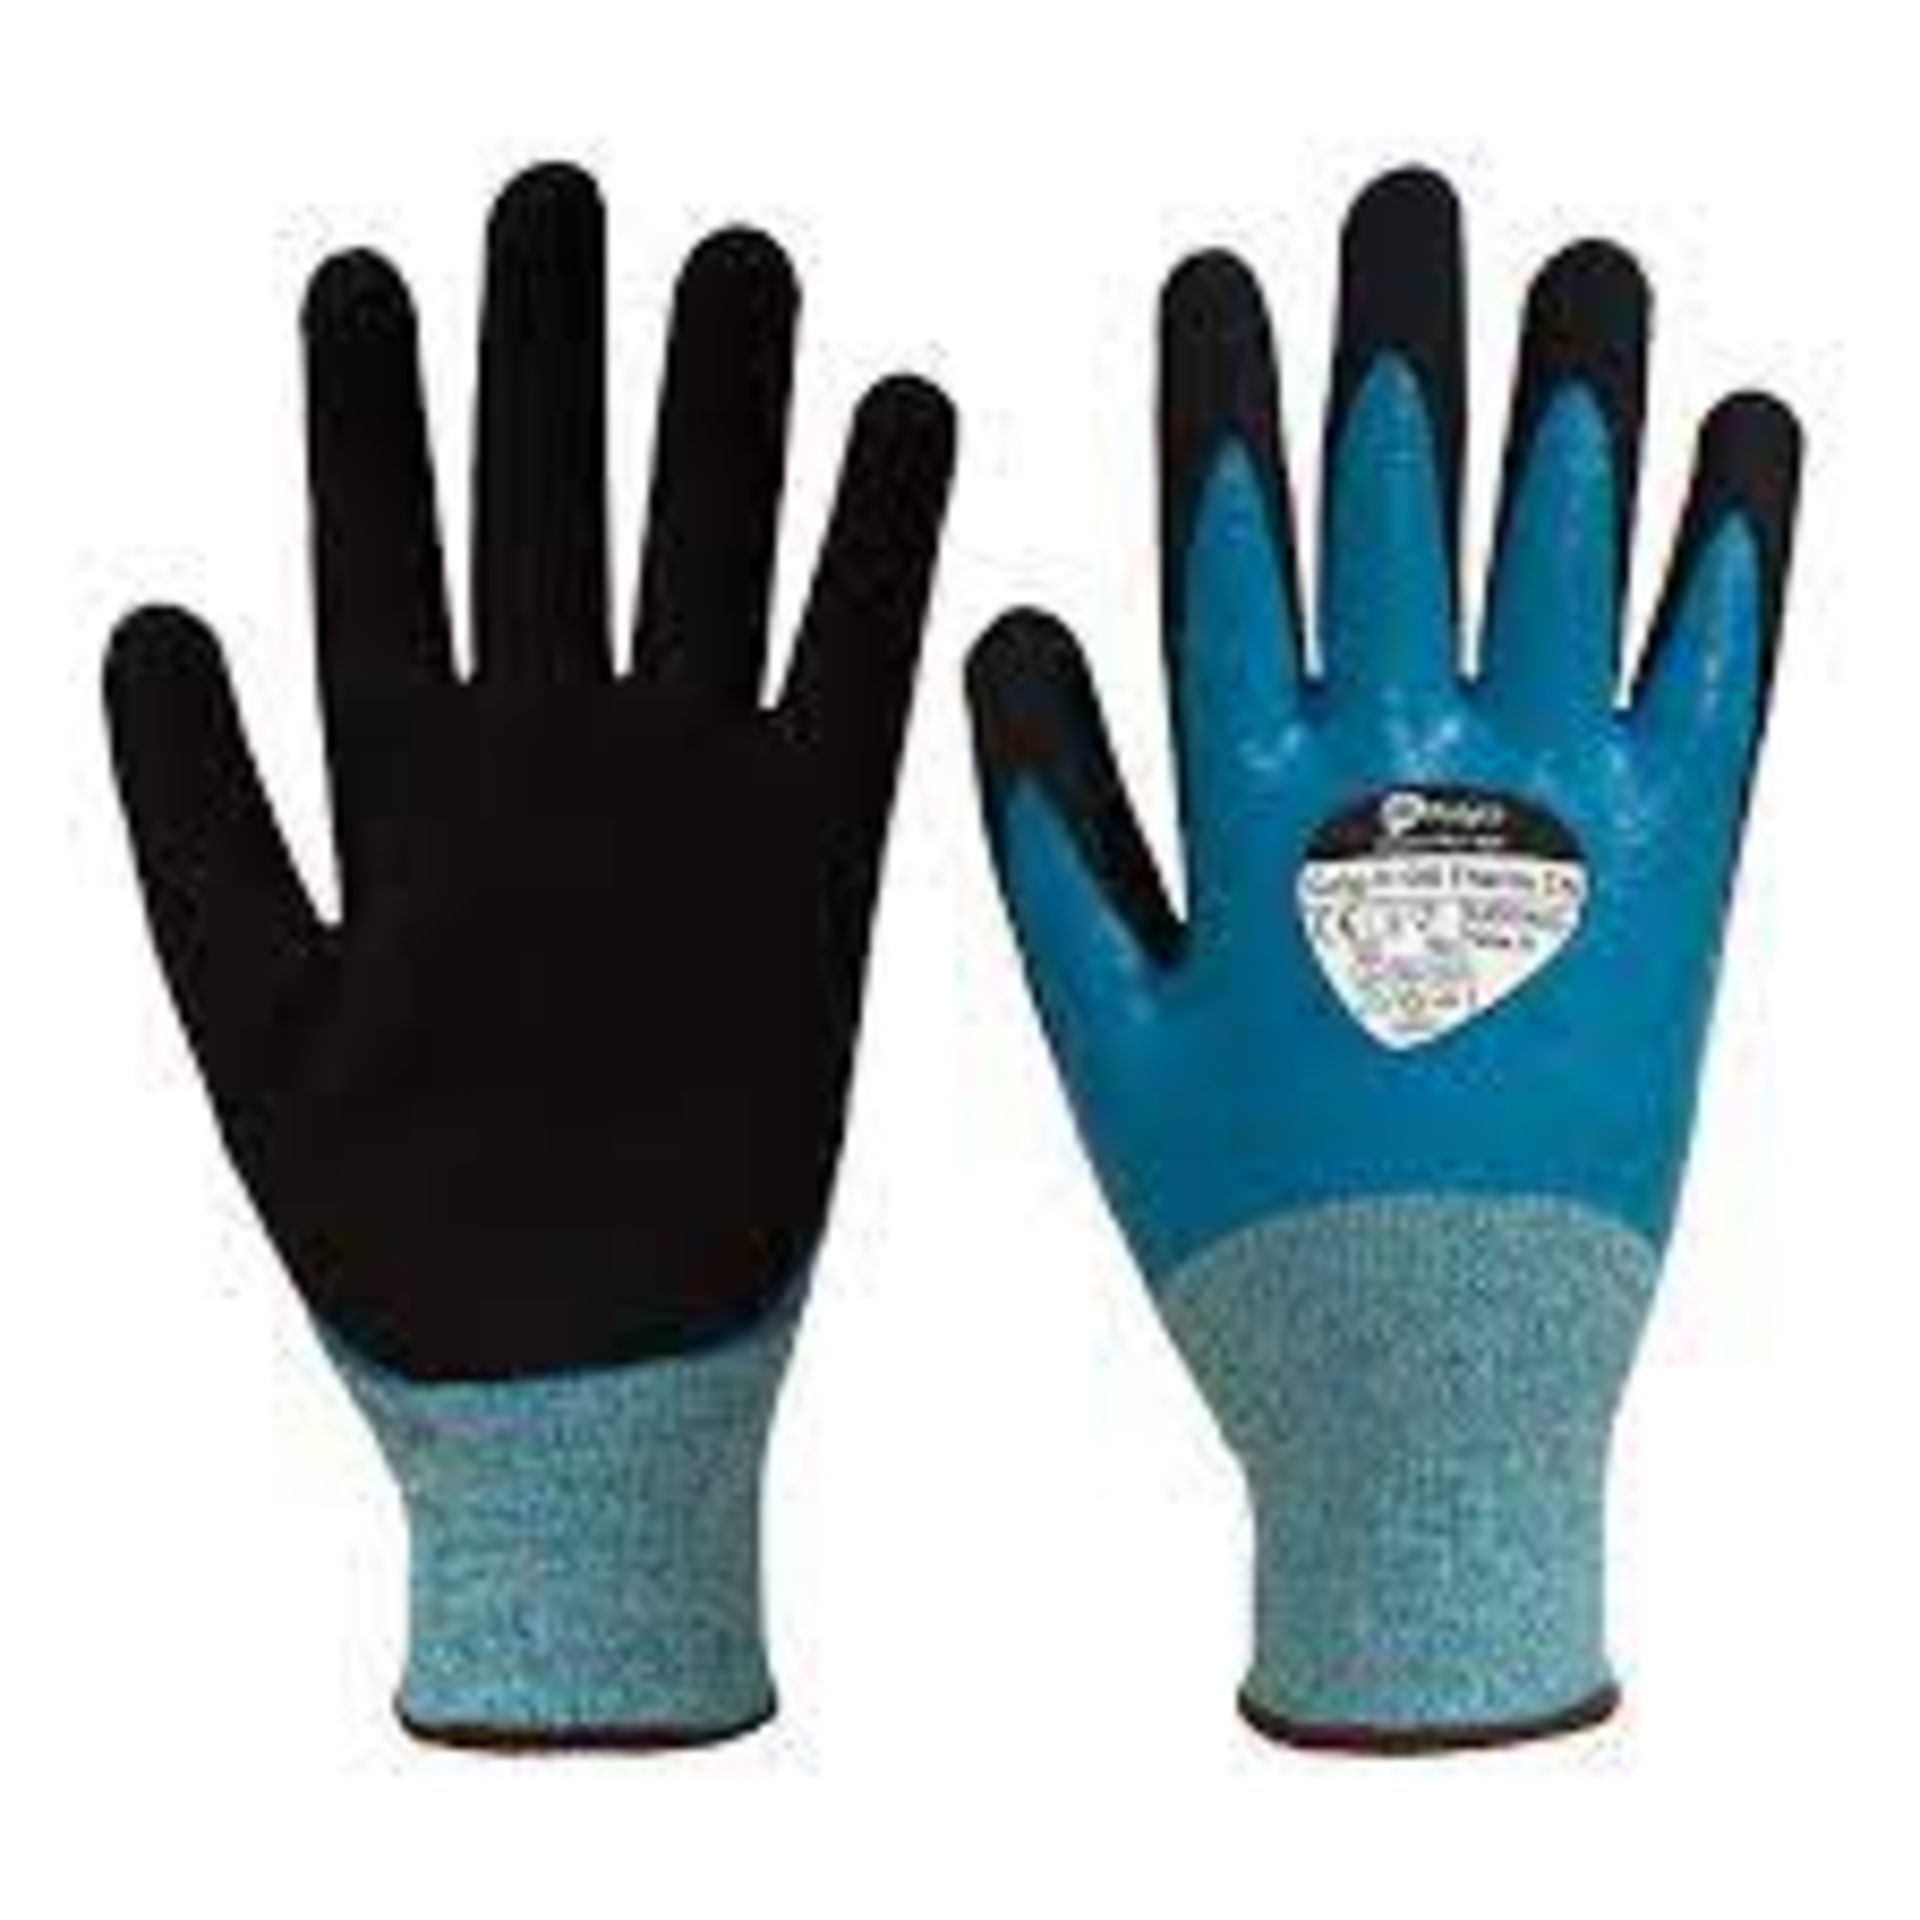 200 X BRAND NEW POLYCO GRIP IT OIL C5 THERMAL GLOVES SIZES 7 AND 11 RRP £12 EACH